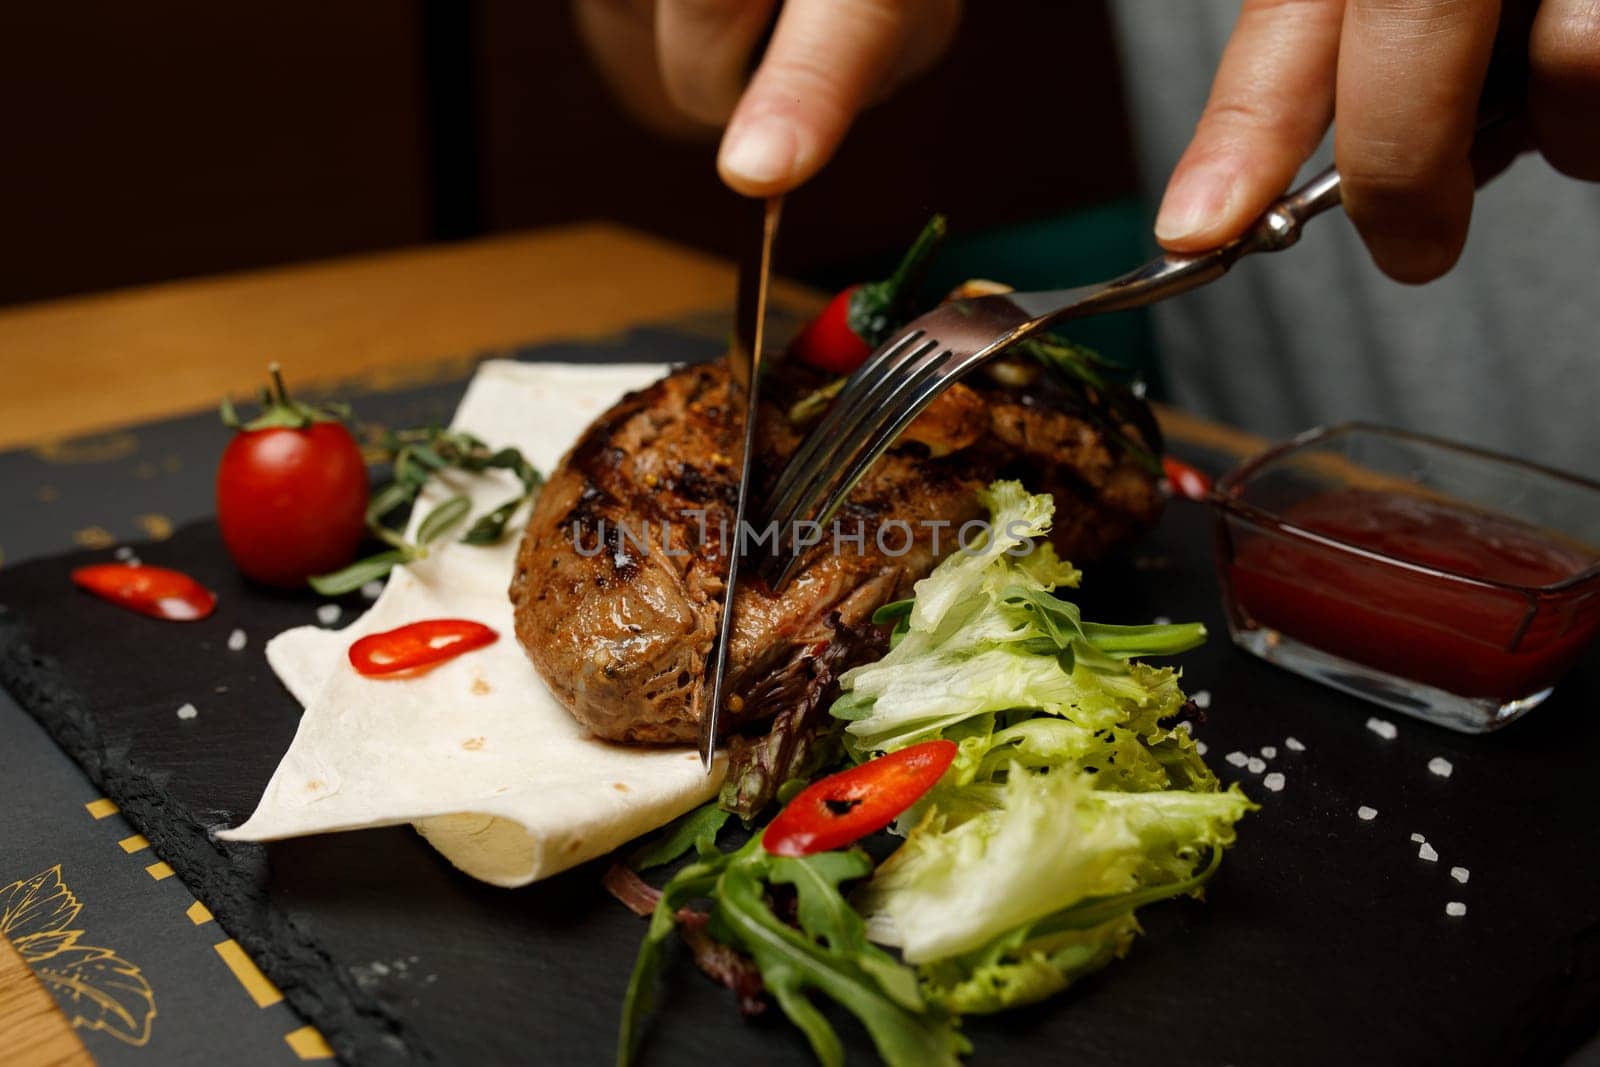 steak on the board, restaurant meat hand. High quality photo